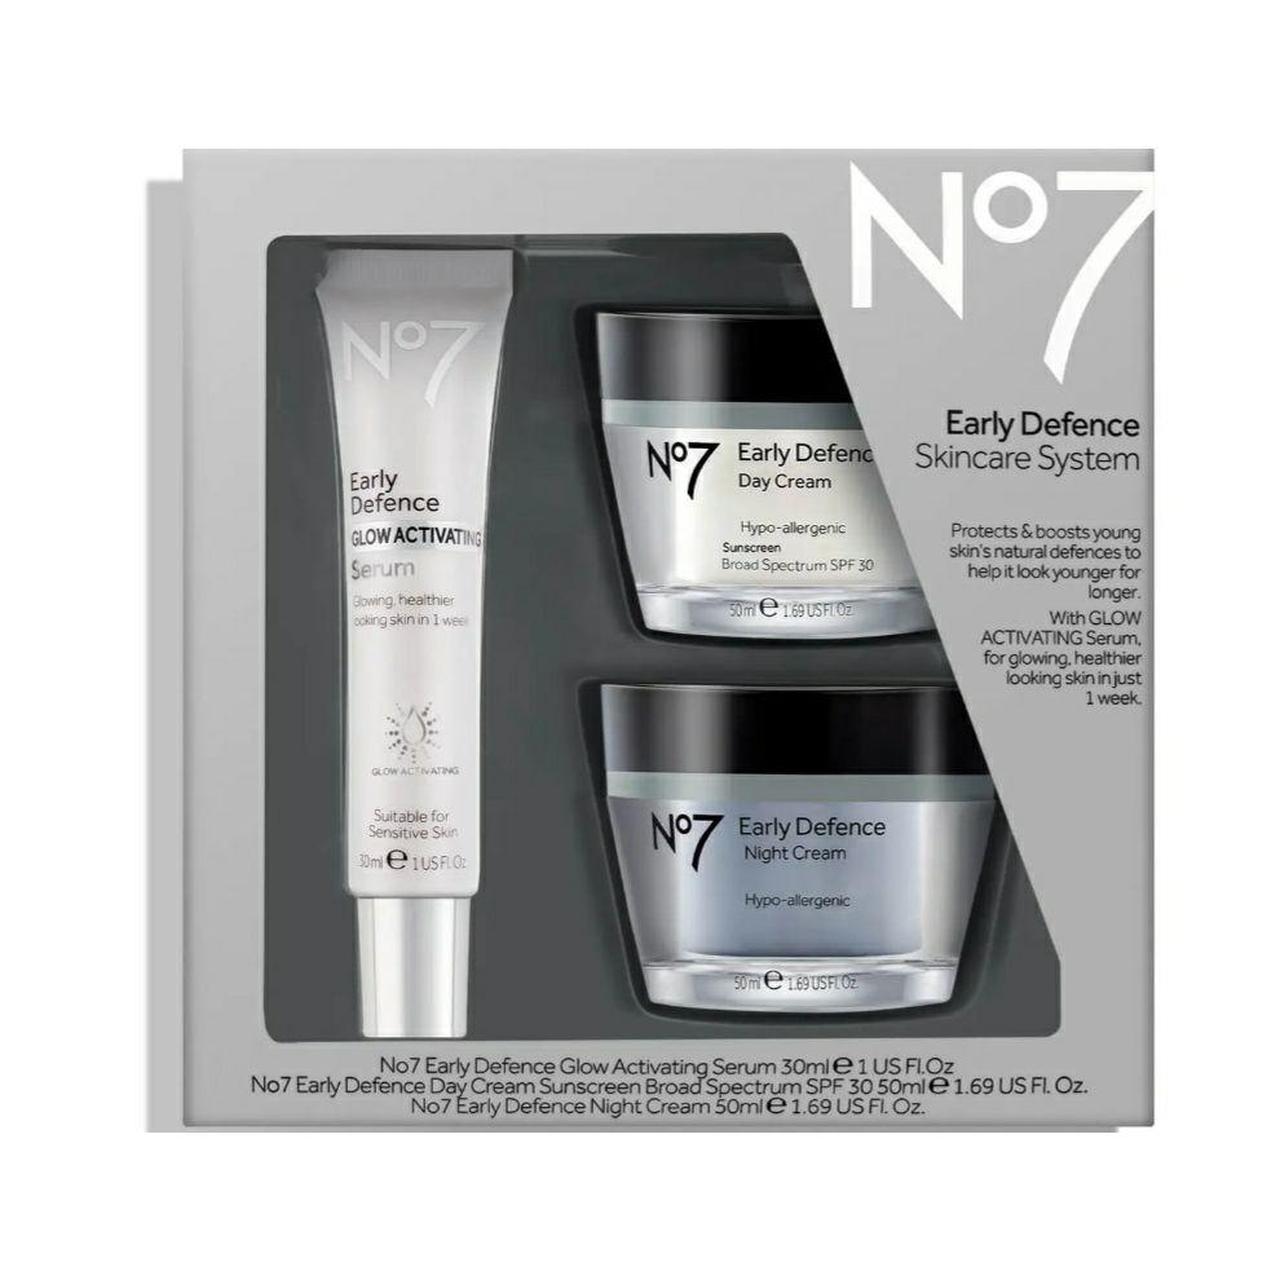 Product Image 1 - The No7 Early Defense Skincare System has